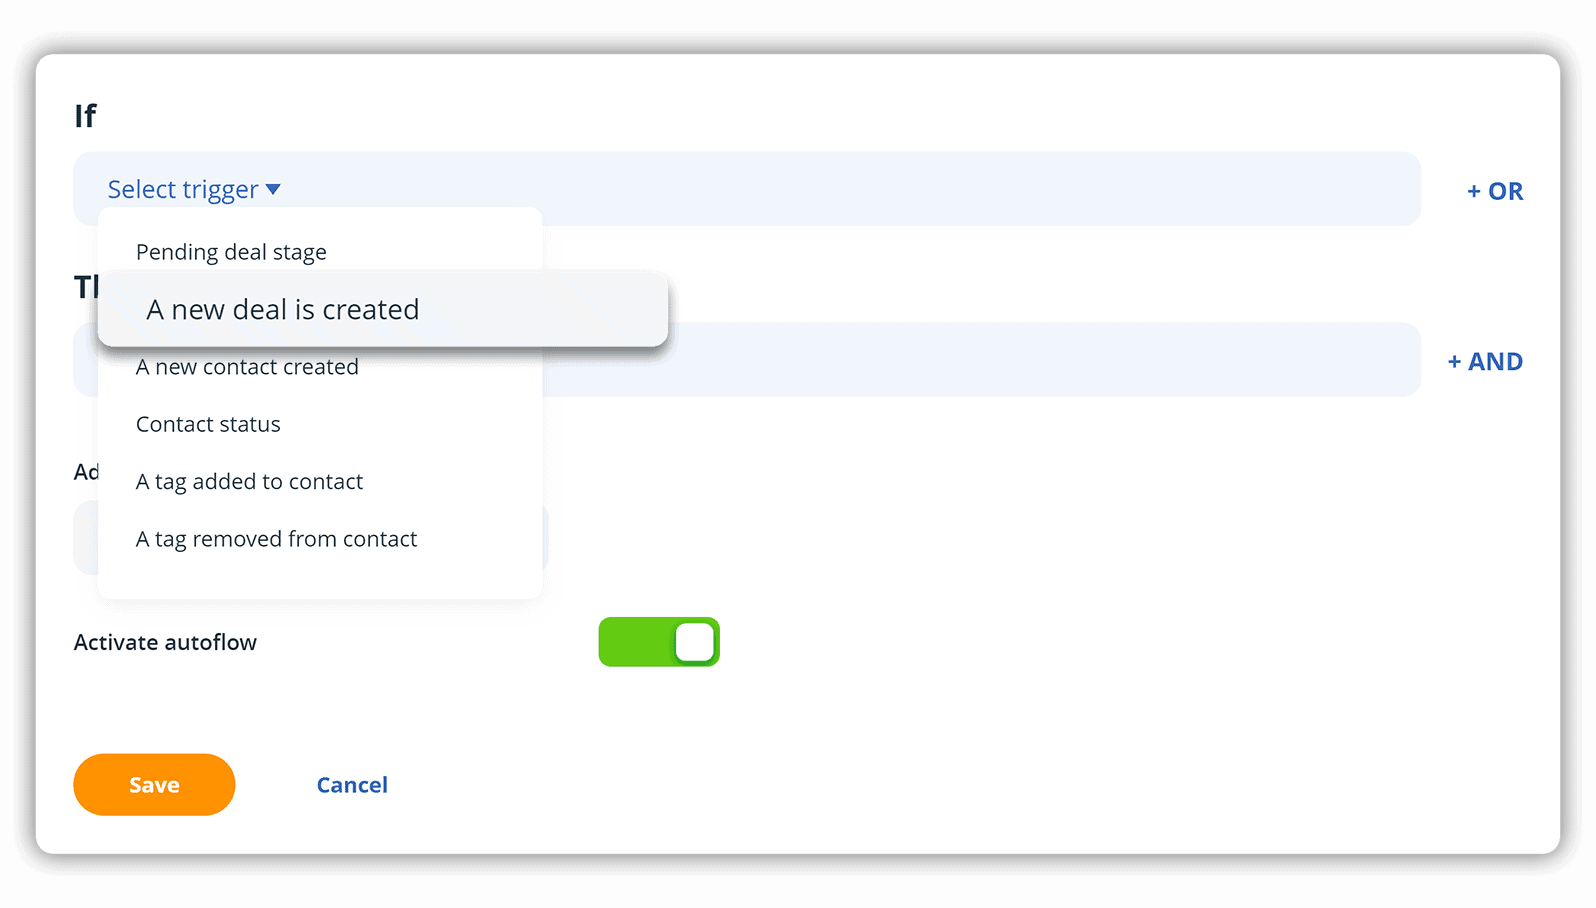 In OnePageCRM, users can choose a trigger to set up their sales automation process